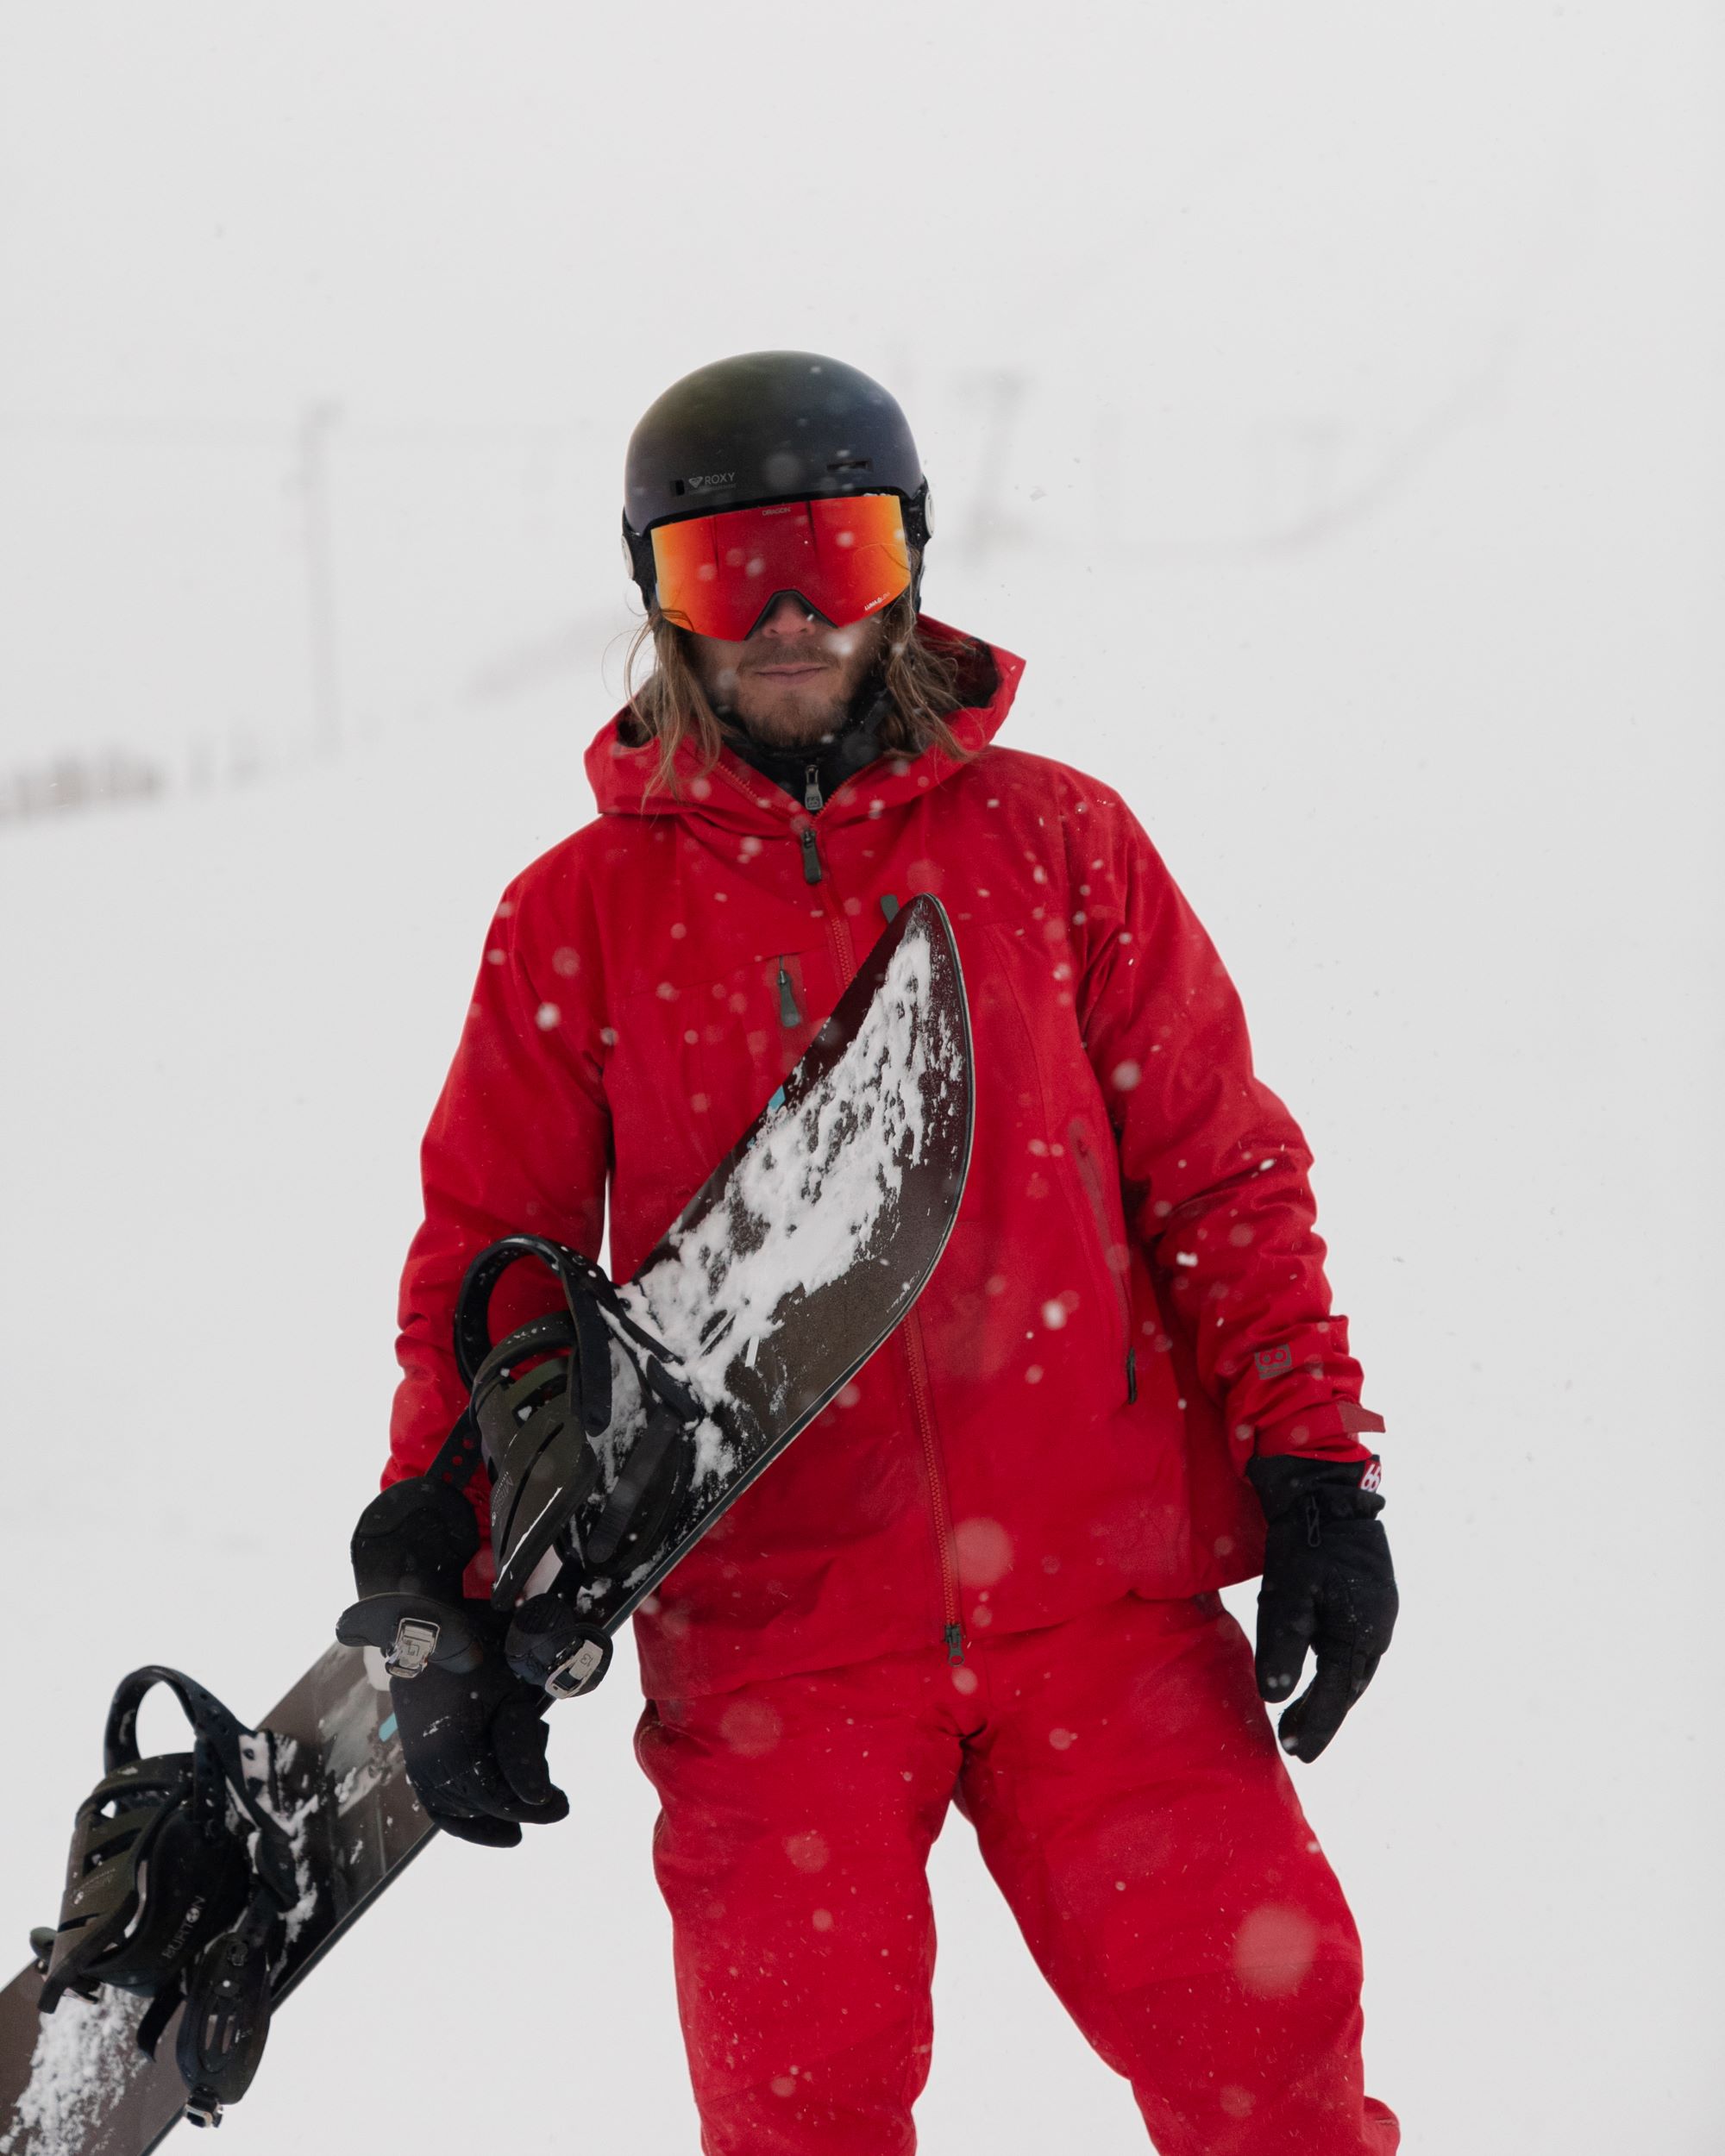 Rúrik Gíslason is dressed in a red skiing outfit, wearing helmet and ski goggles and carrying a snowboard.